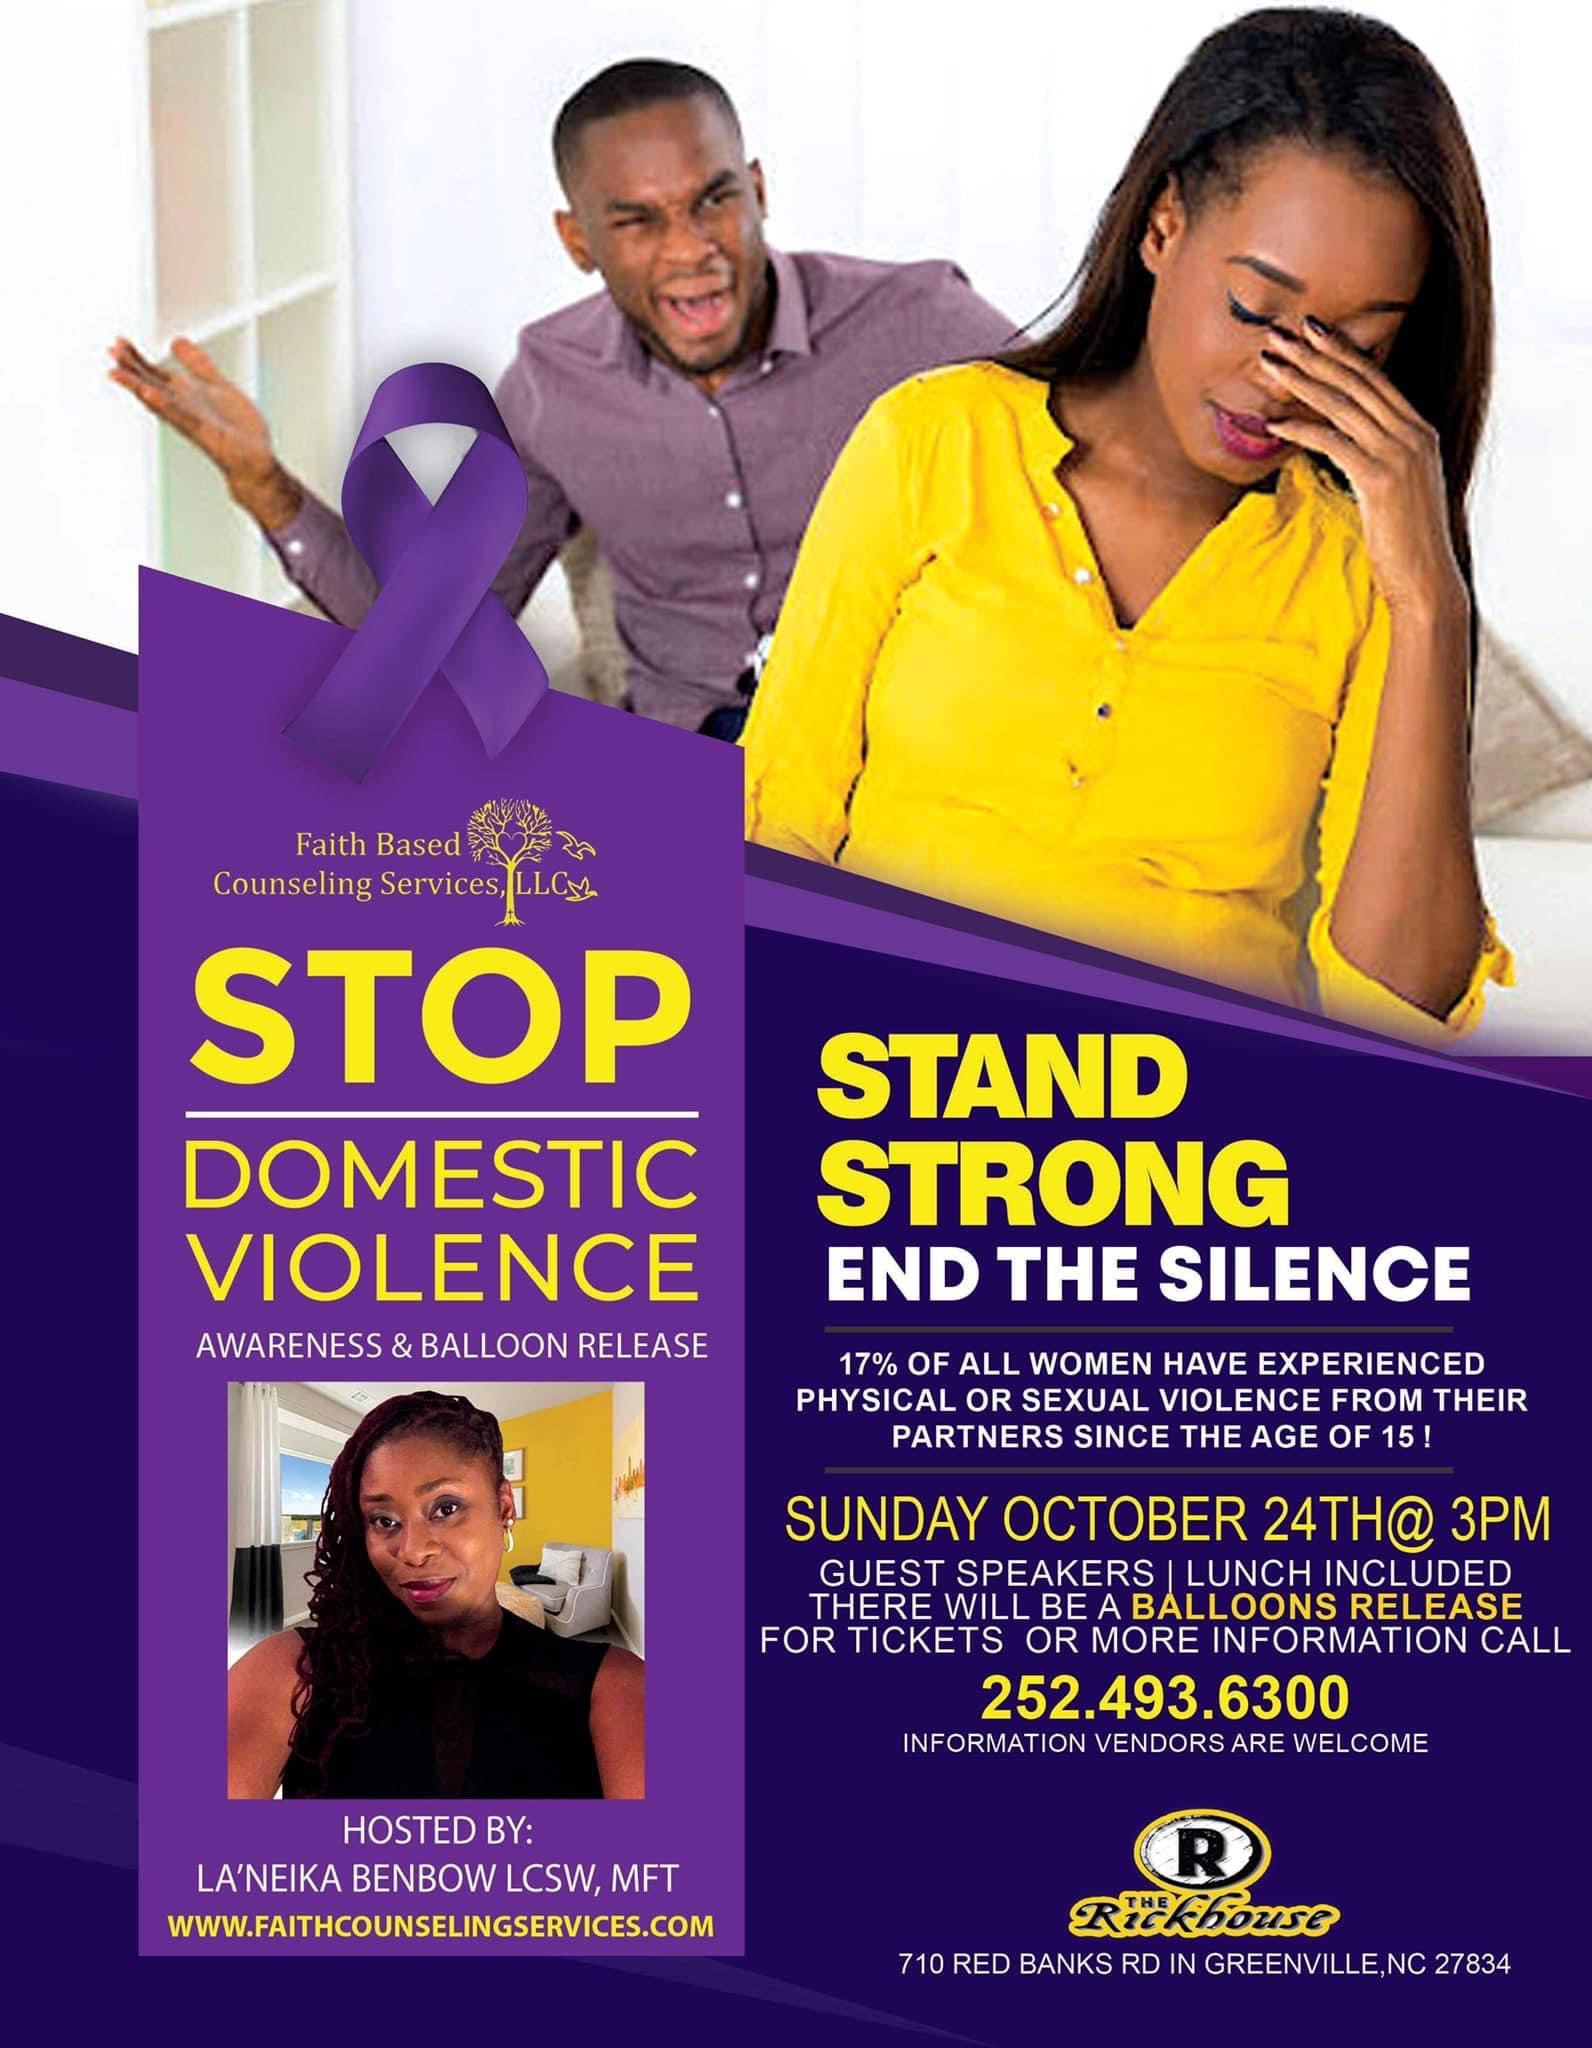 STOP Domestic Violence Awareness & Balloon Release